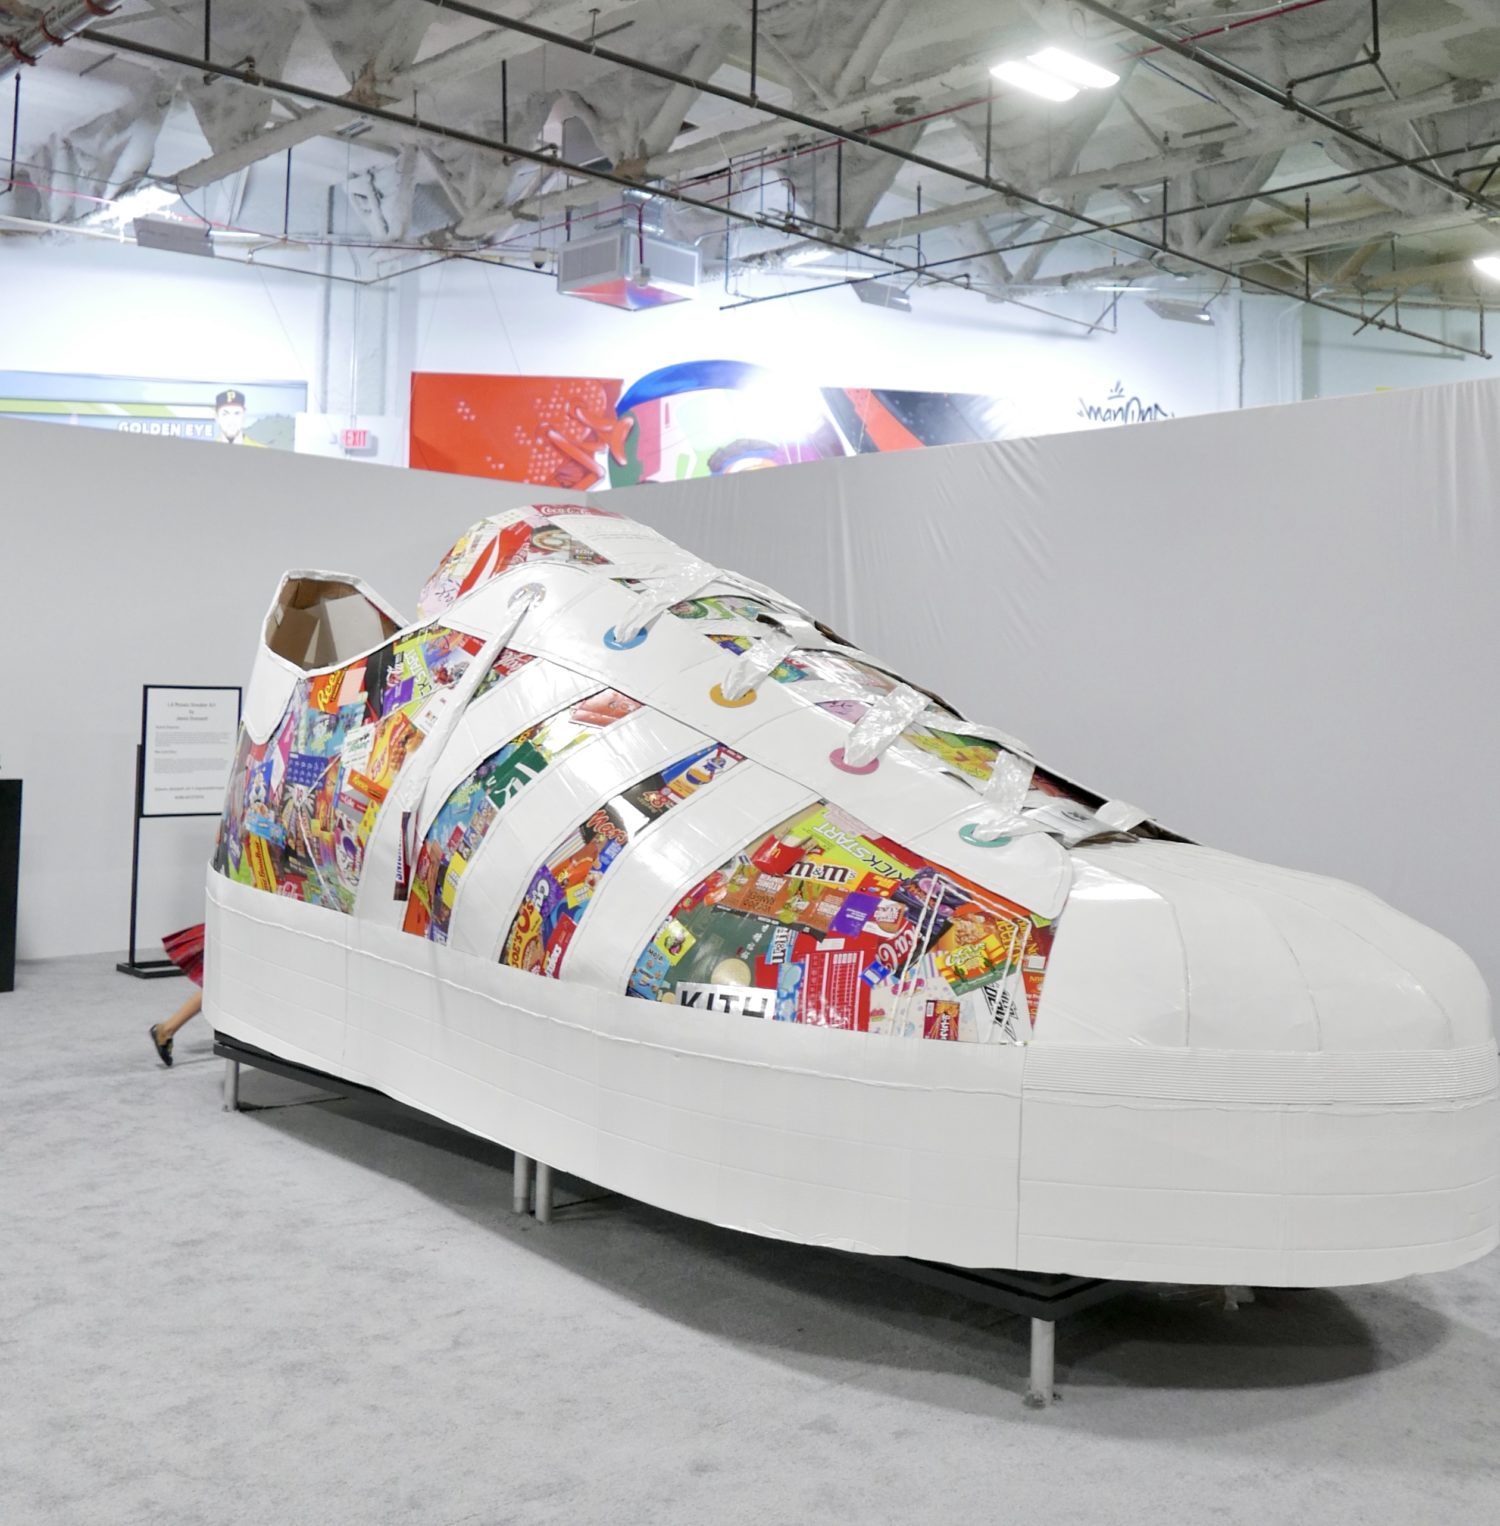 Sneakertopia, a large white shoe adorned with various designs.